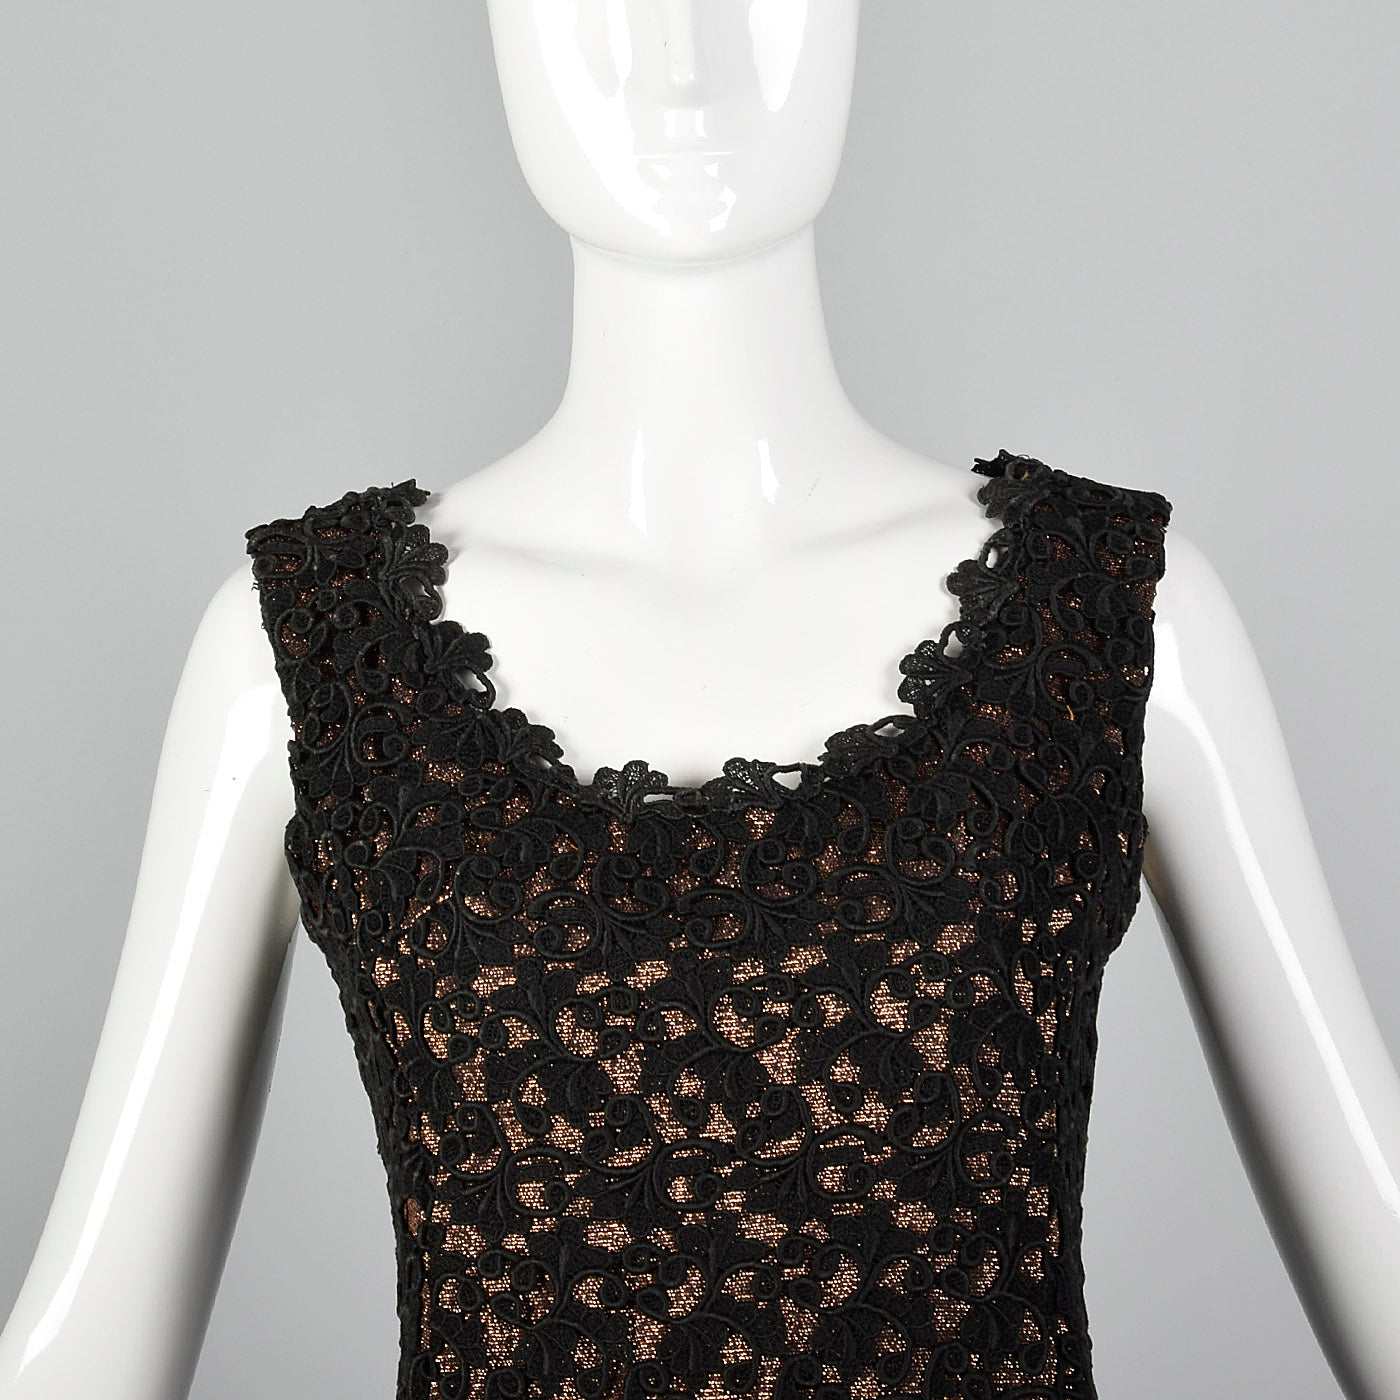 1960s Bronze Lurex Dress with Black Lace Overlay